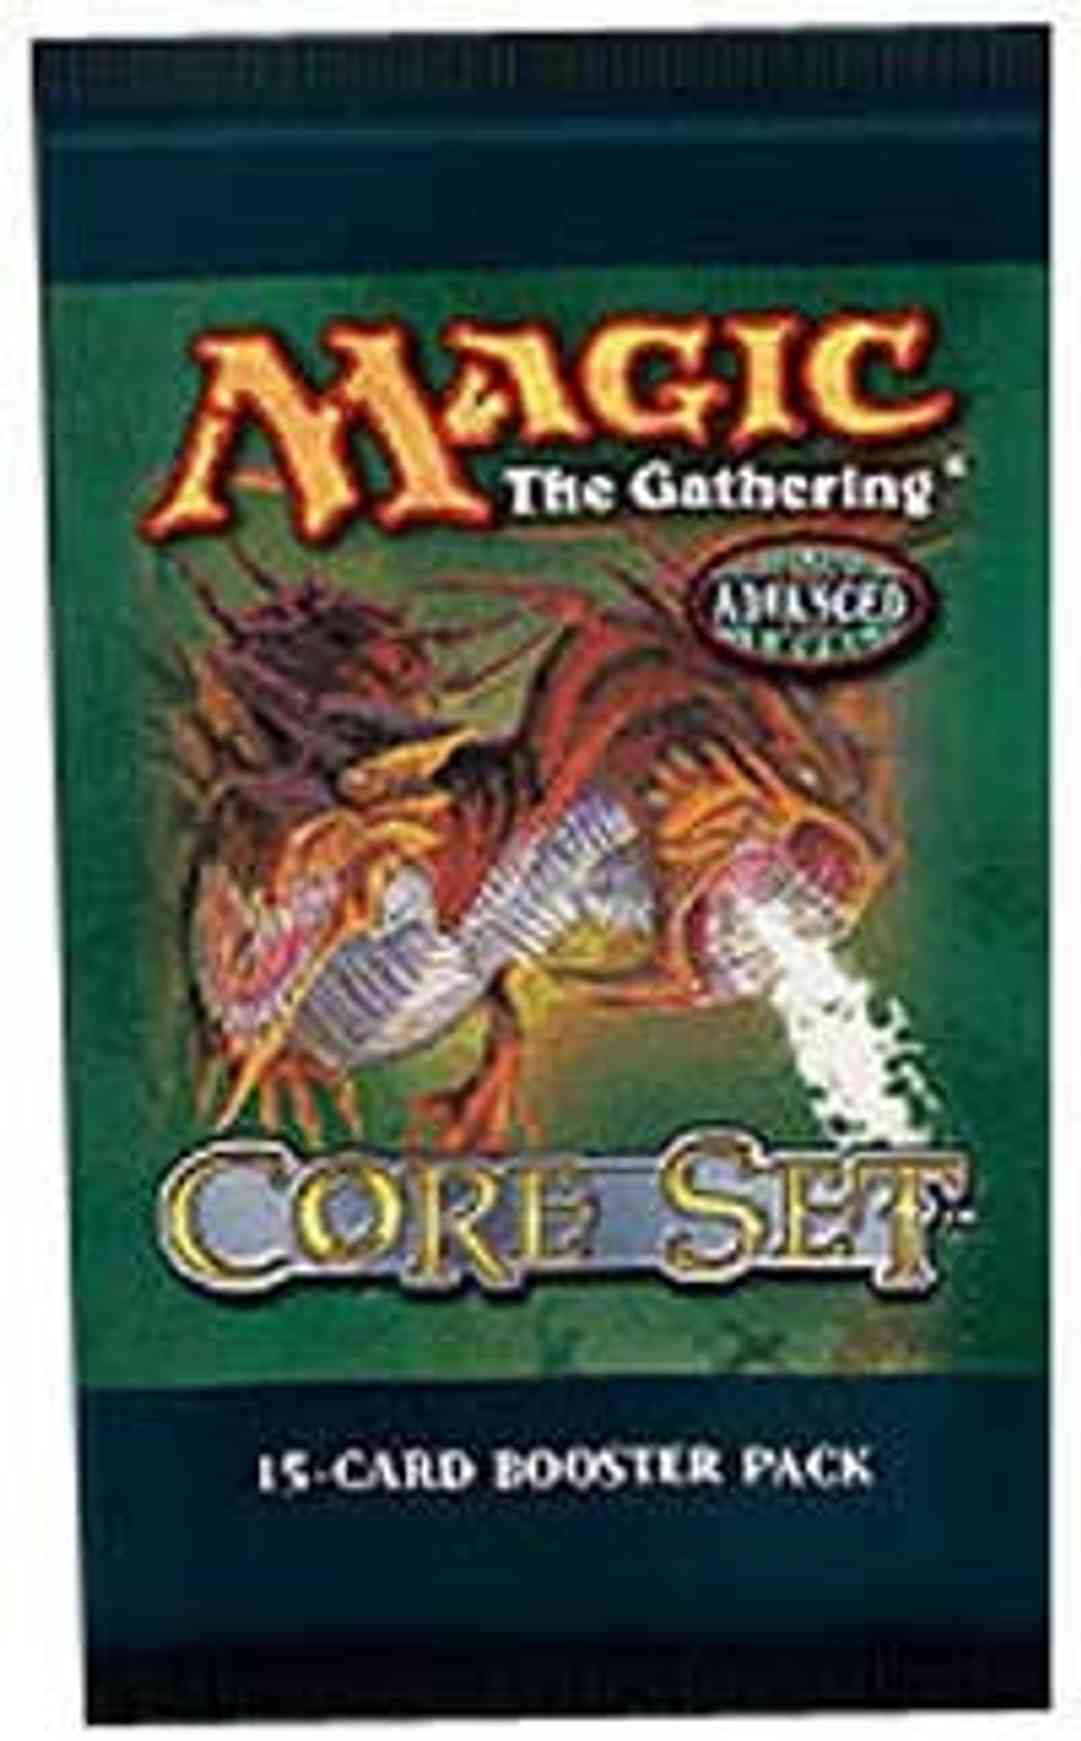 8th Edition - Booster Pack magic card front